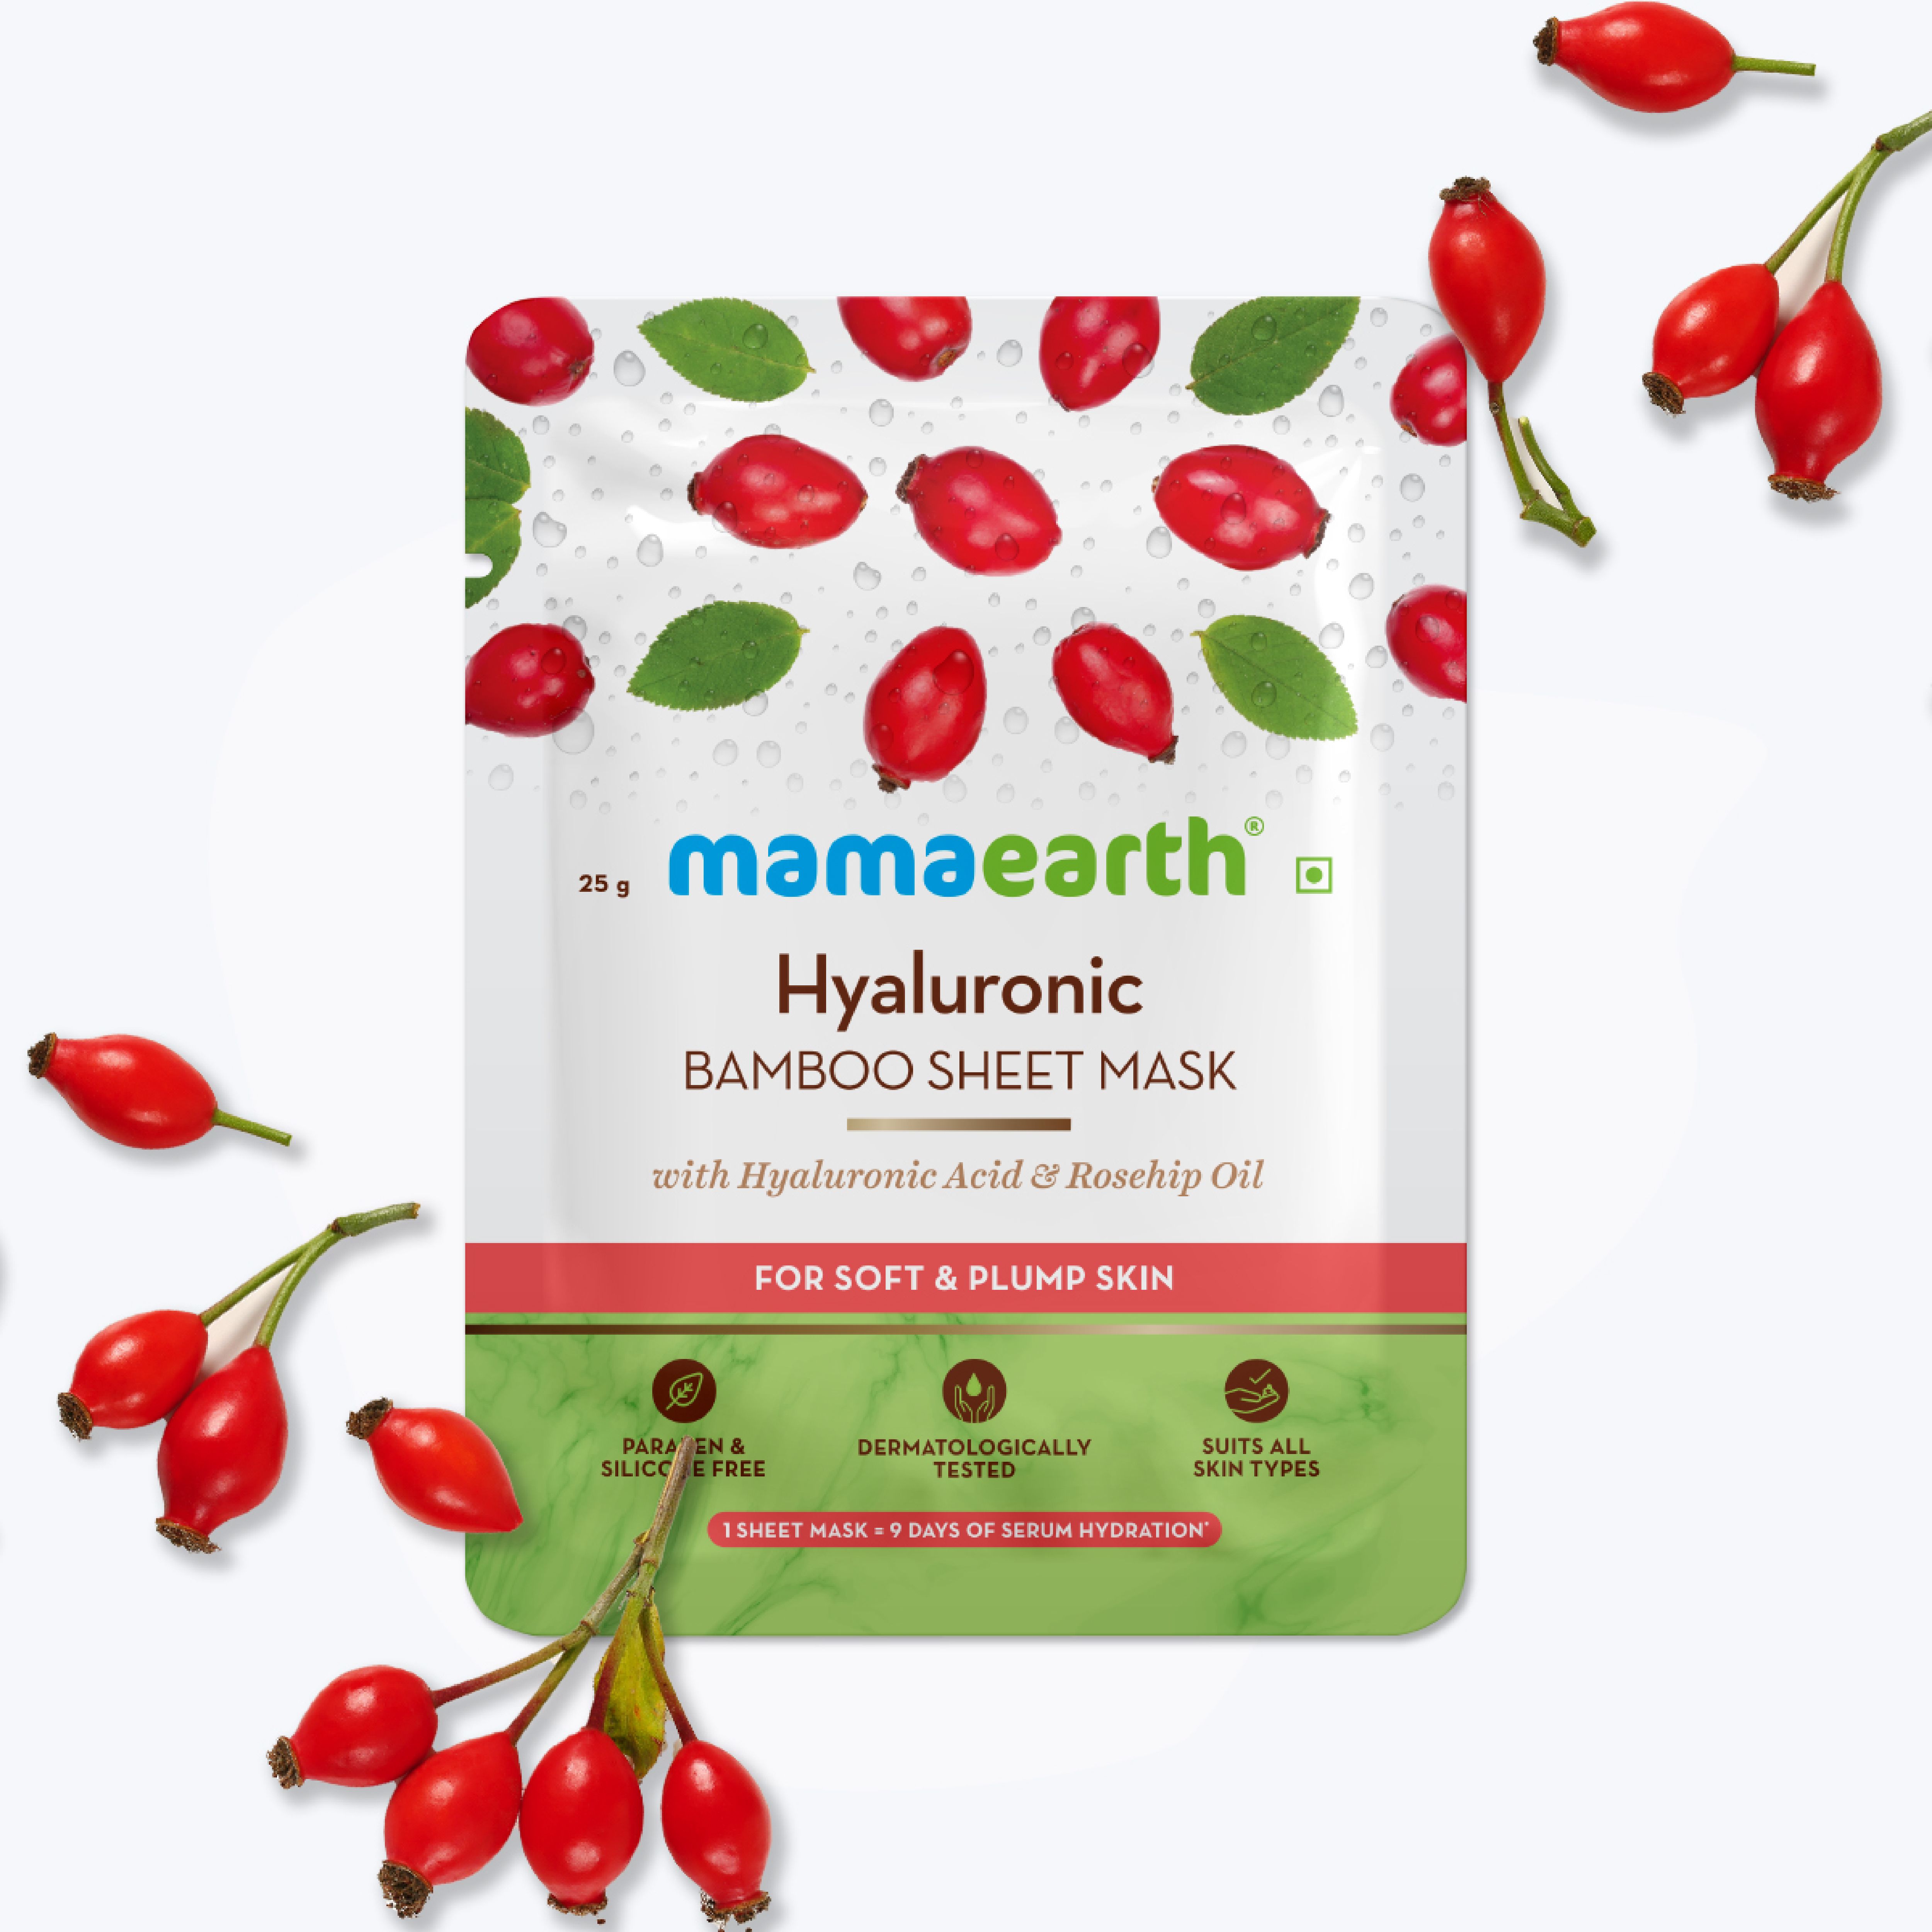 Mamaearth Hyaluronic Bamboo Sheet Mask Better Than Others Available in The Market